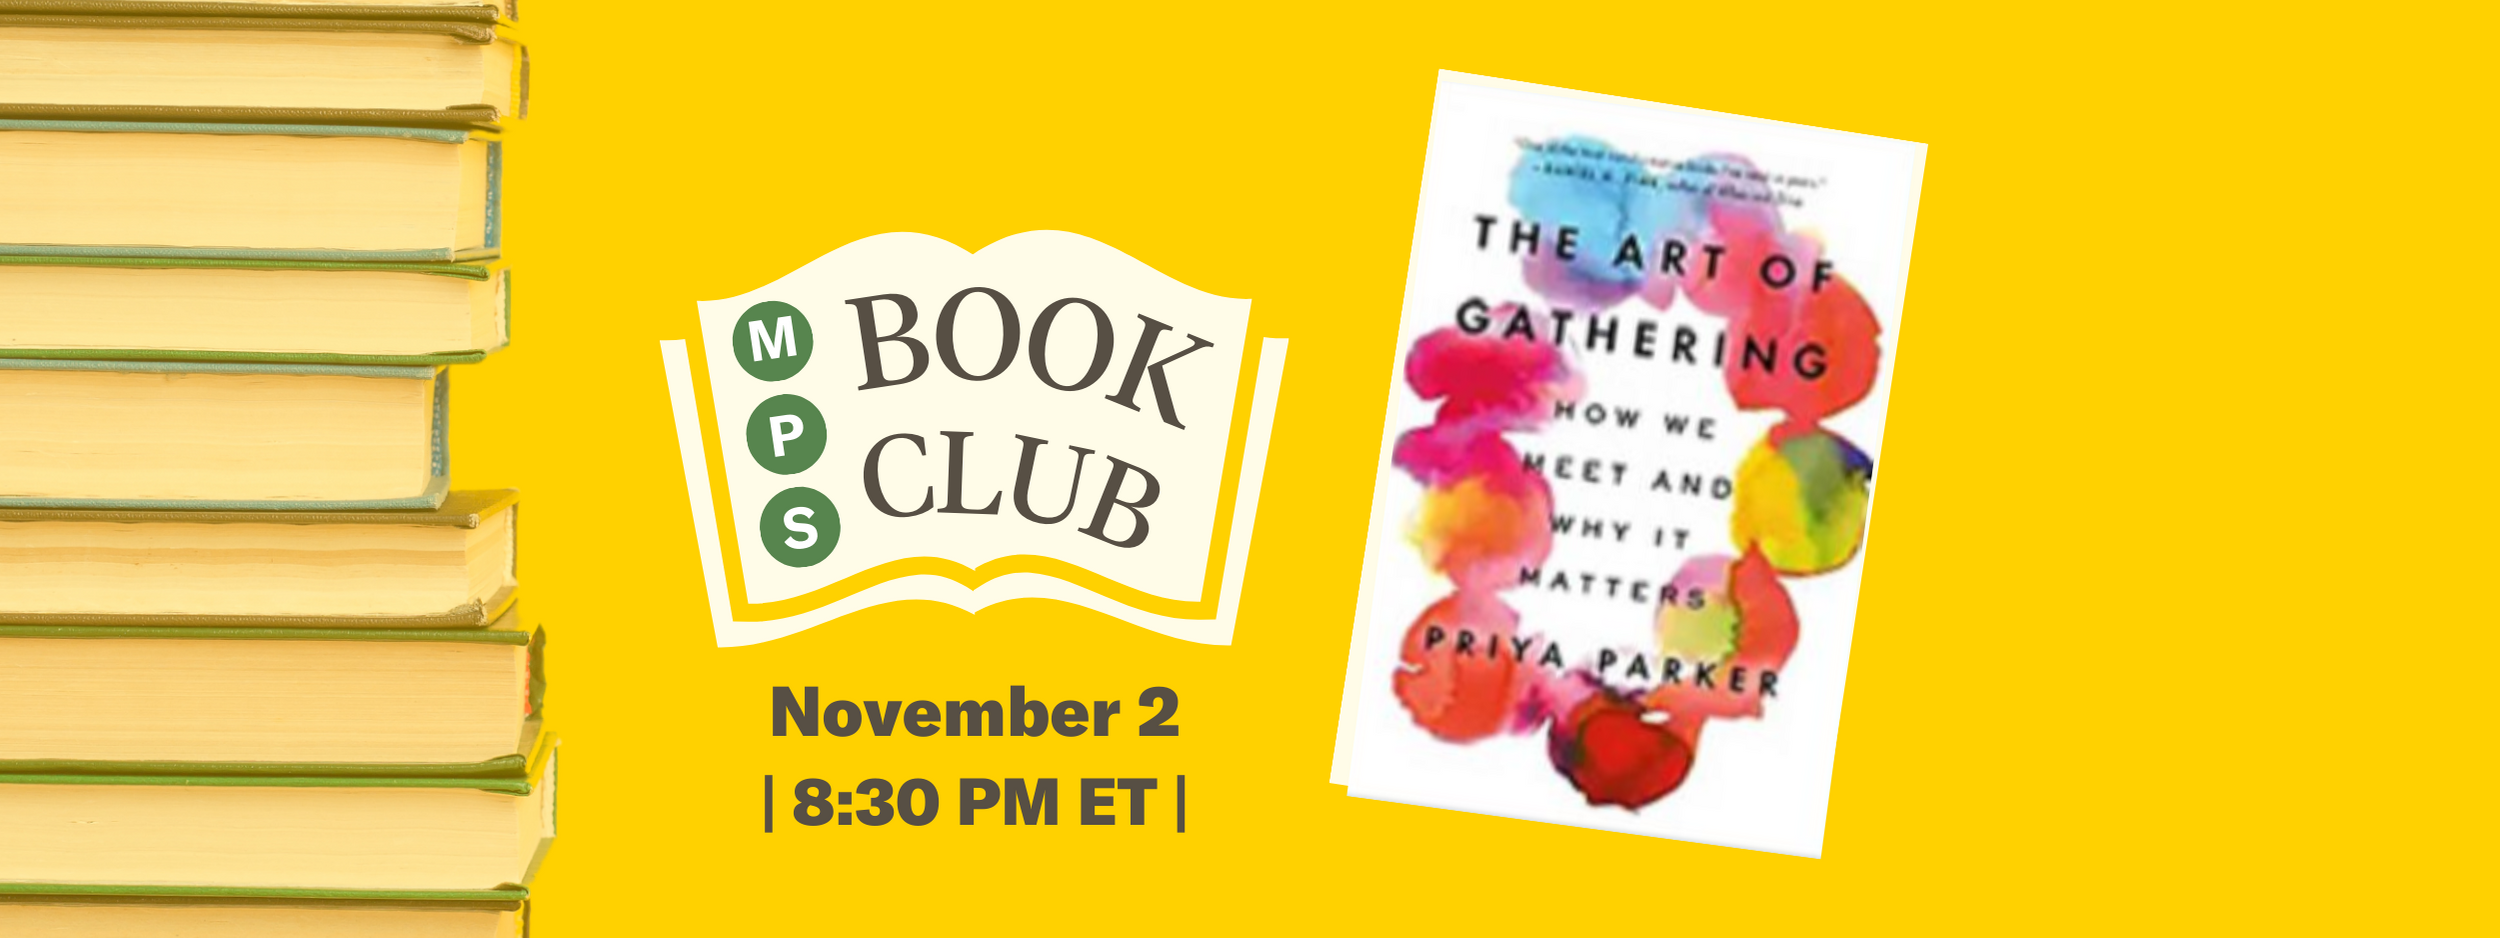 Book Club Web Event Header Horse & The Art of Gathering